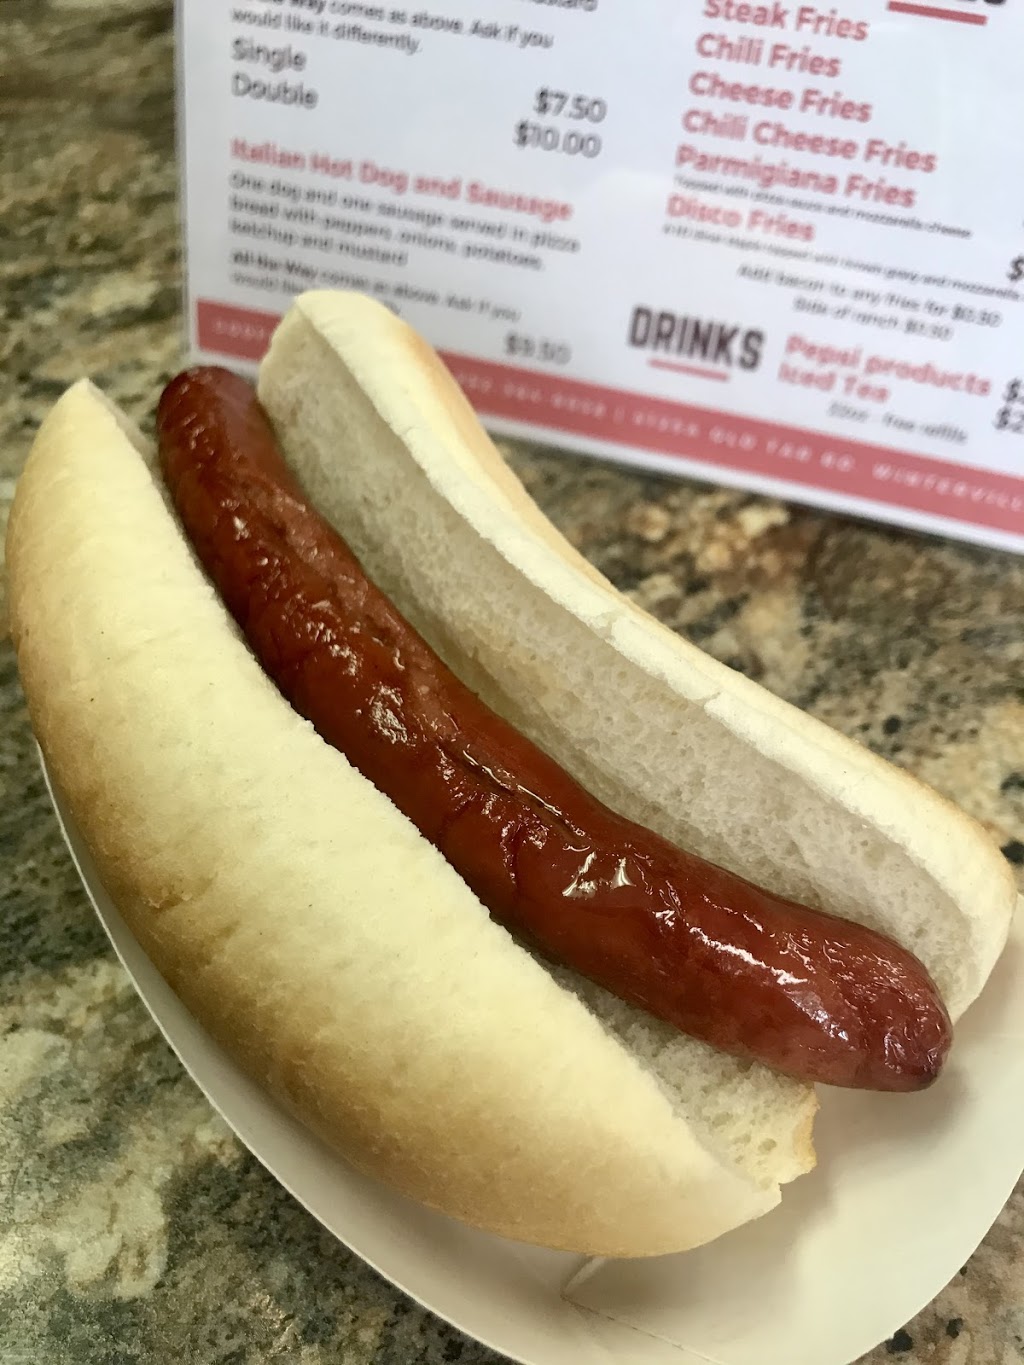 Godfathers Dogs - Burgers - Italian Sausage | restaurant | 4125 Old Tar Rd, Winterville, NC 28590, USA | 2523648038 OR +1 252-364-8038